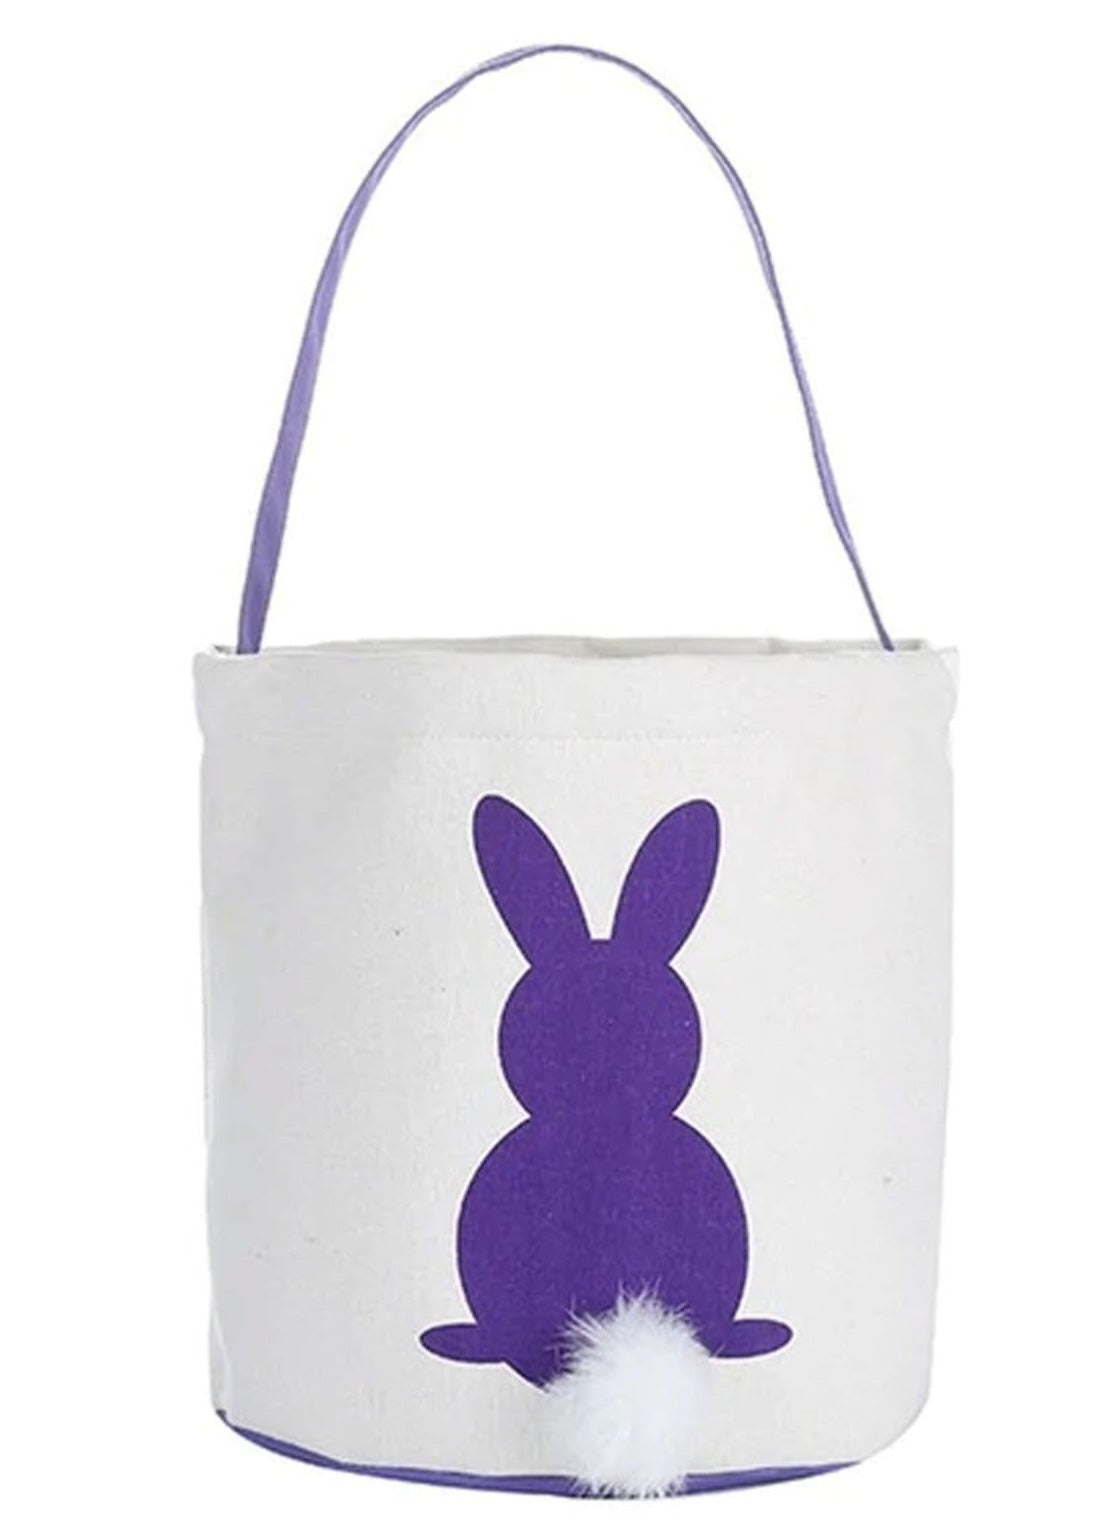 Kids Easter Accessories | Little Girls Bunny Cotton Tail Easter Basket